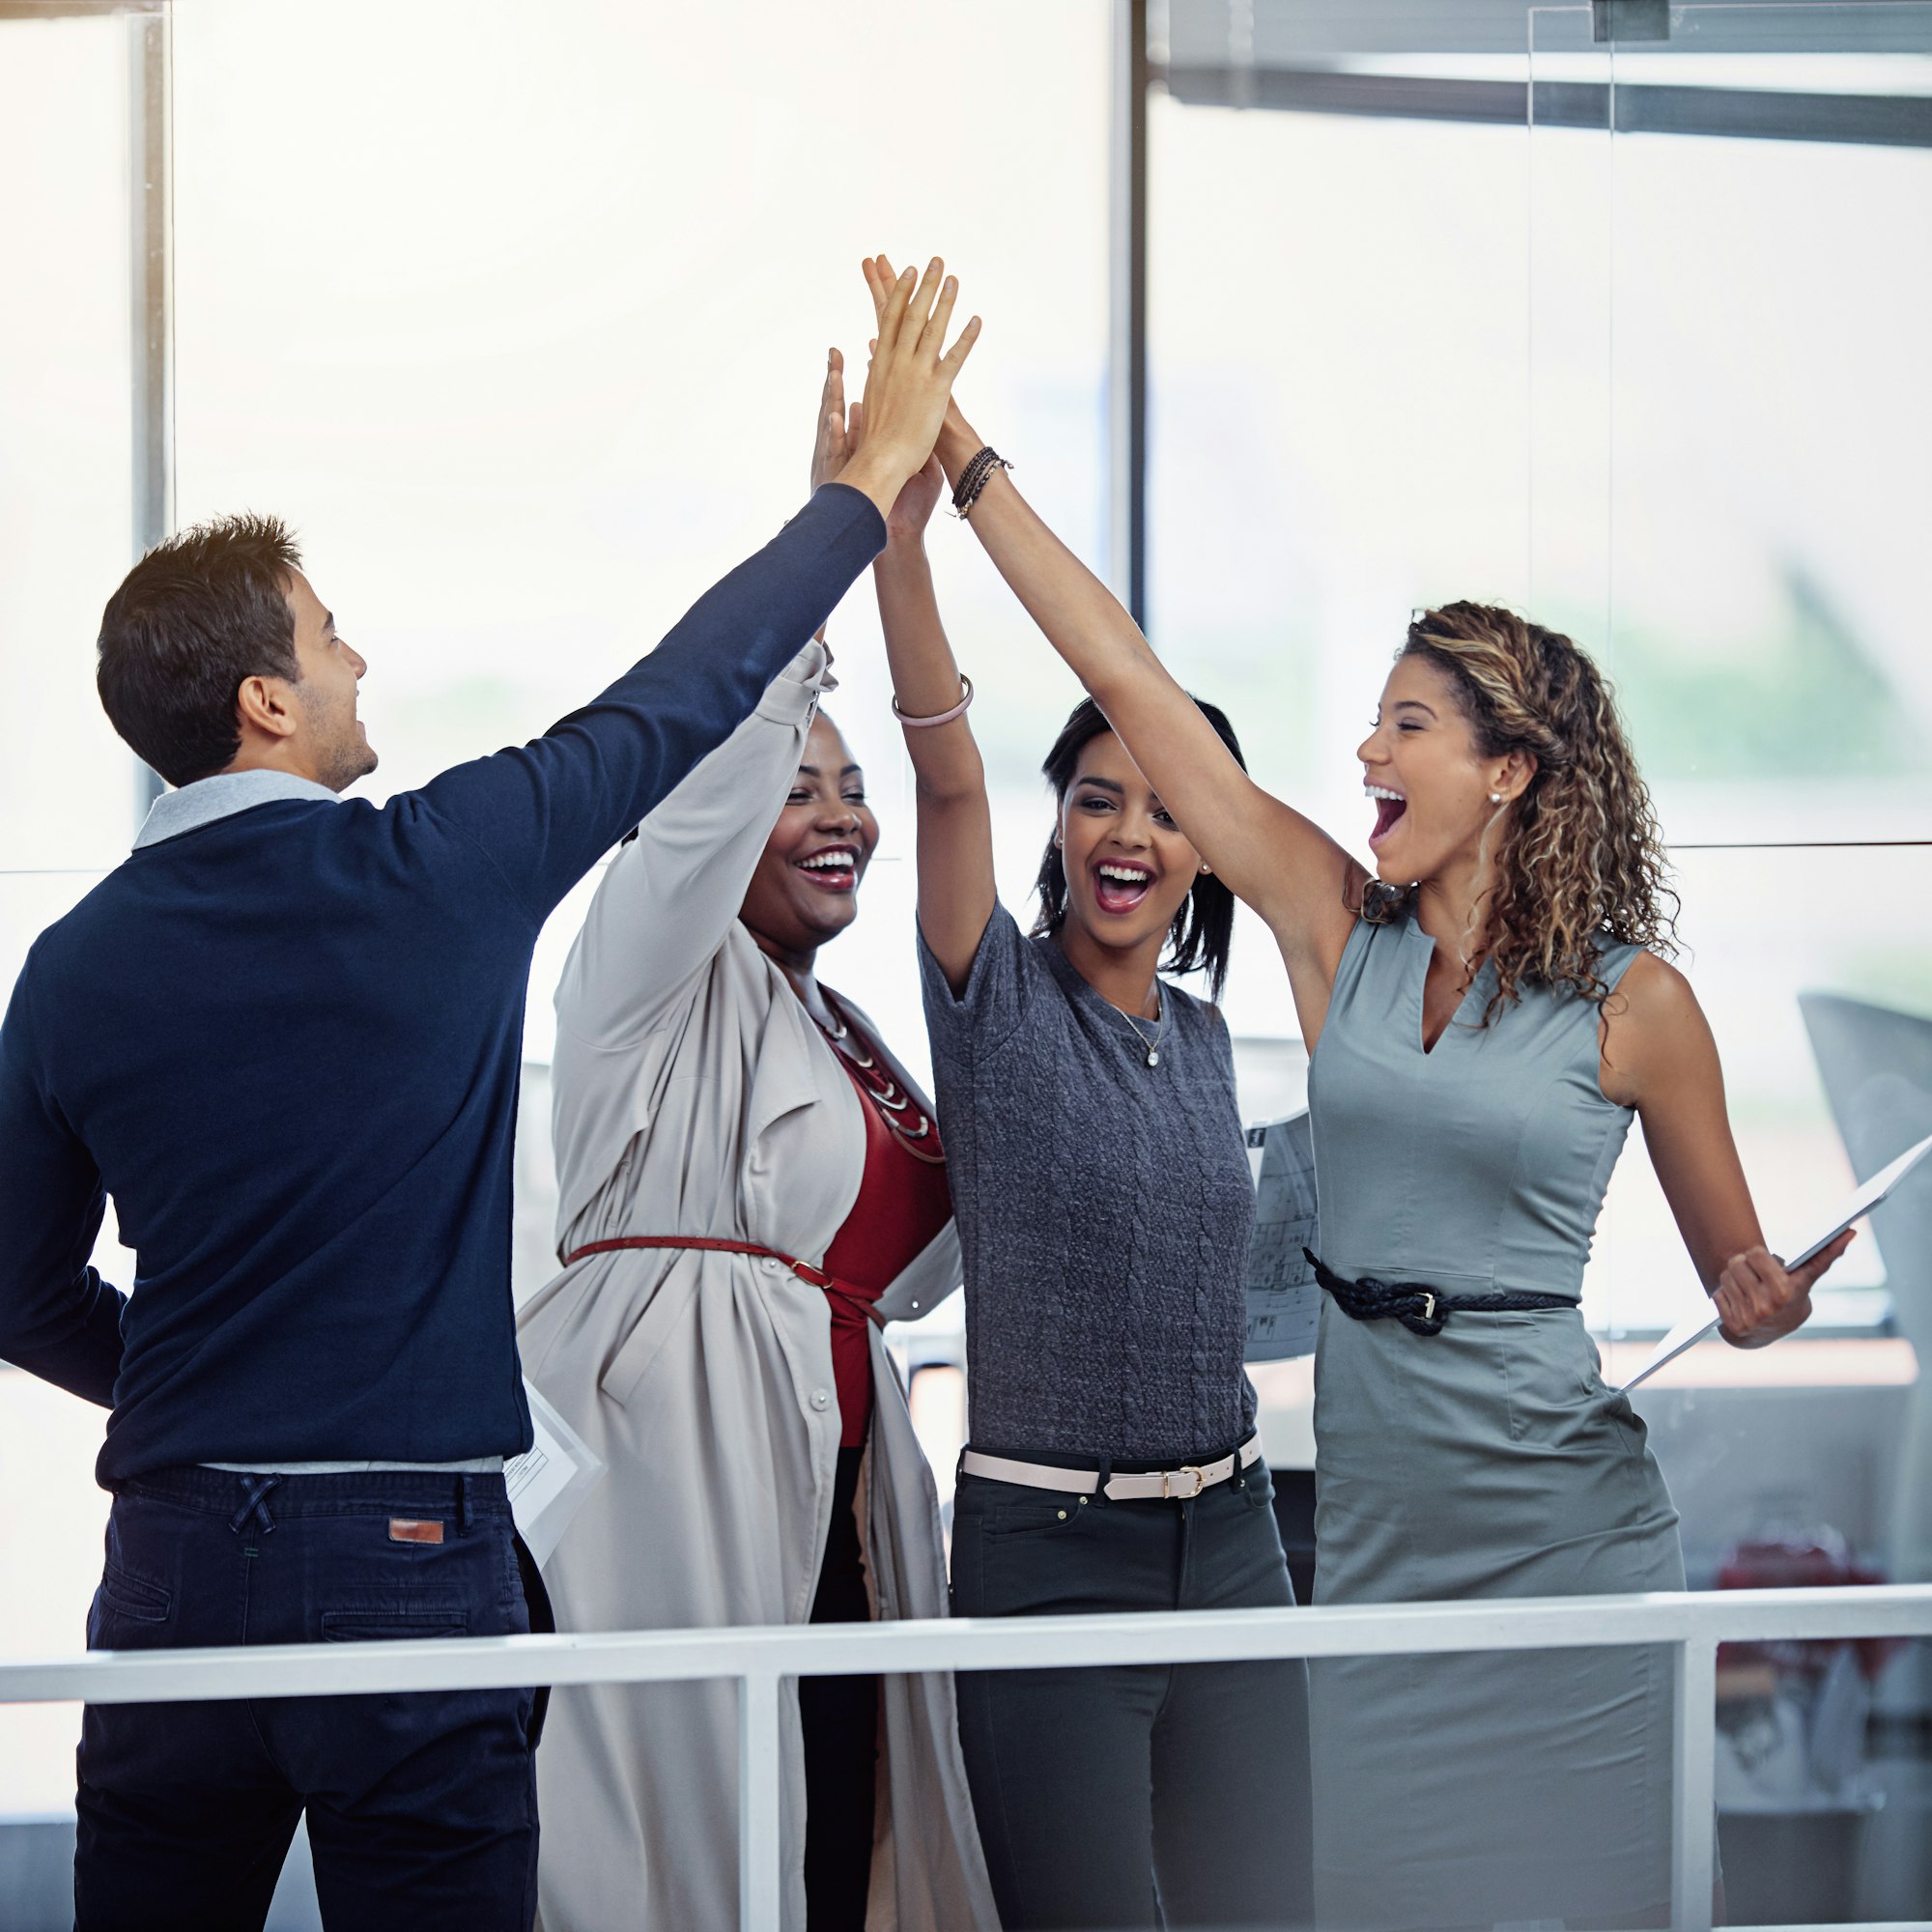 Succeeding as a team. Shot of a group of colleagues high fiving together in an office.